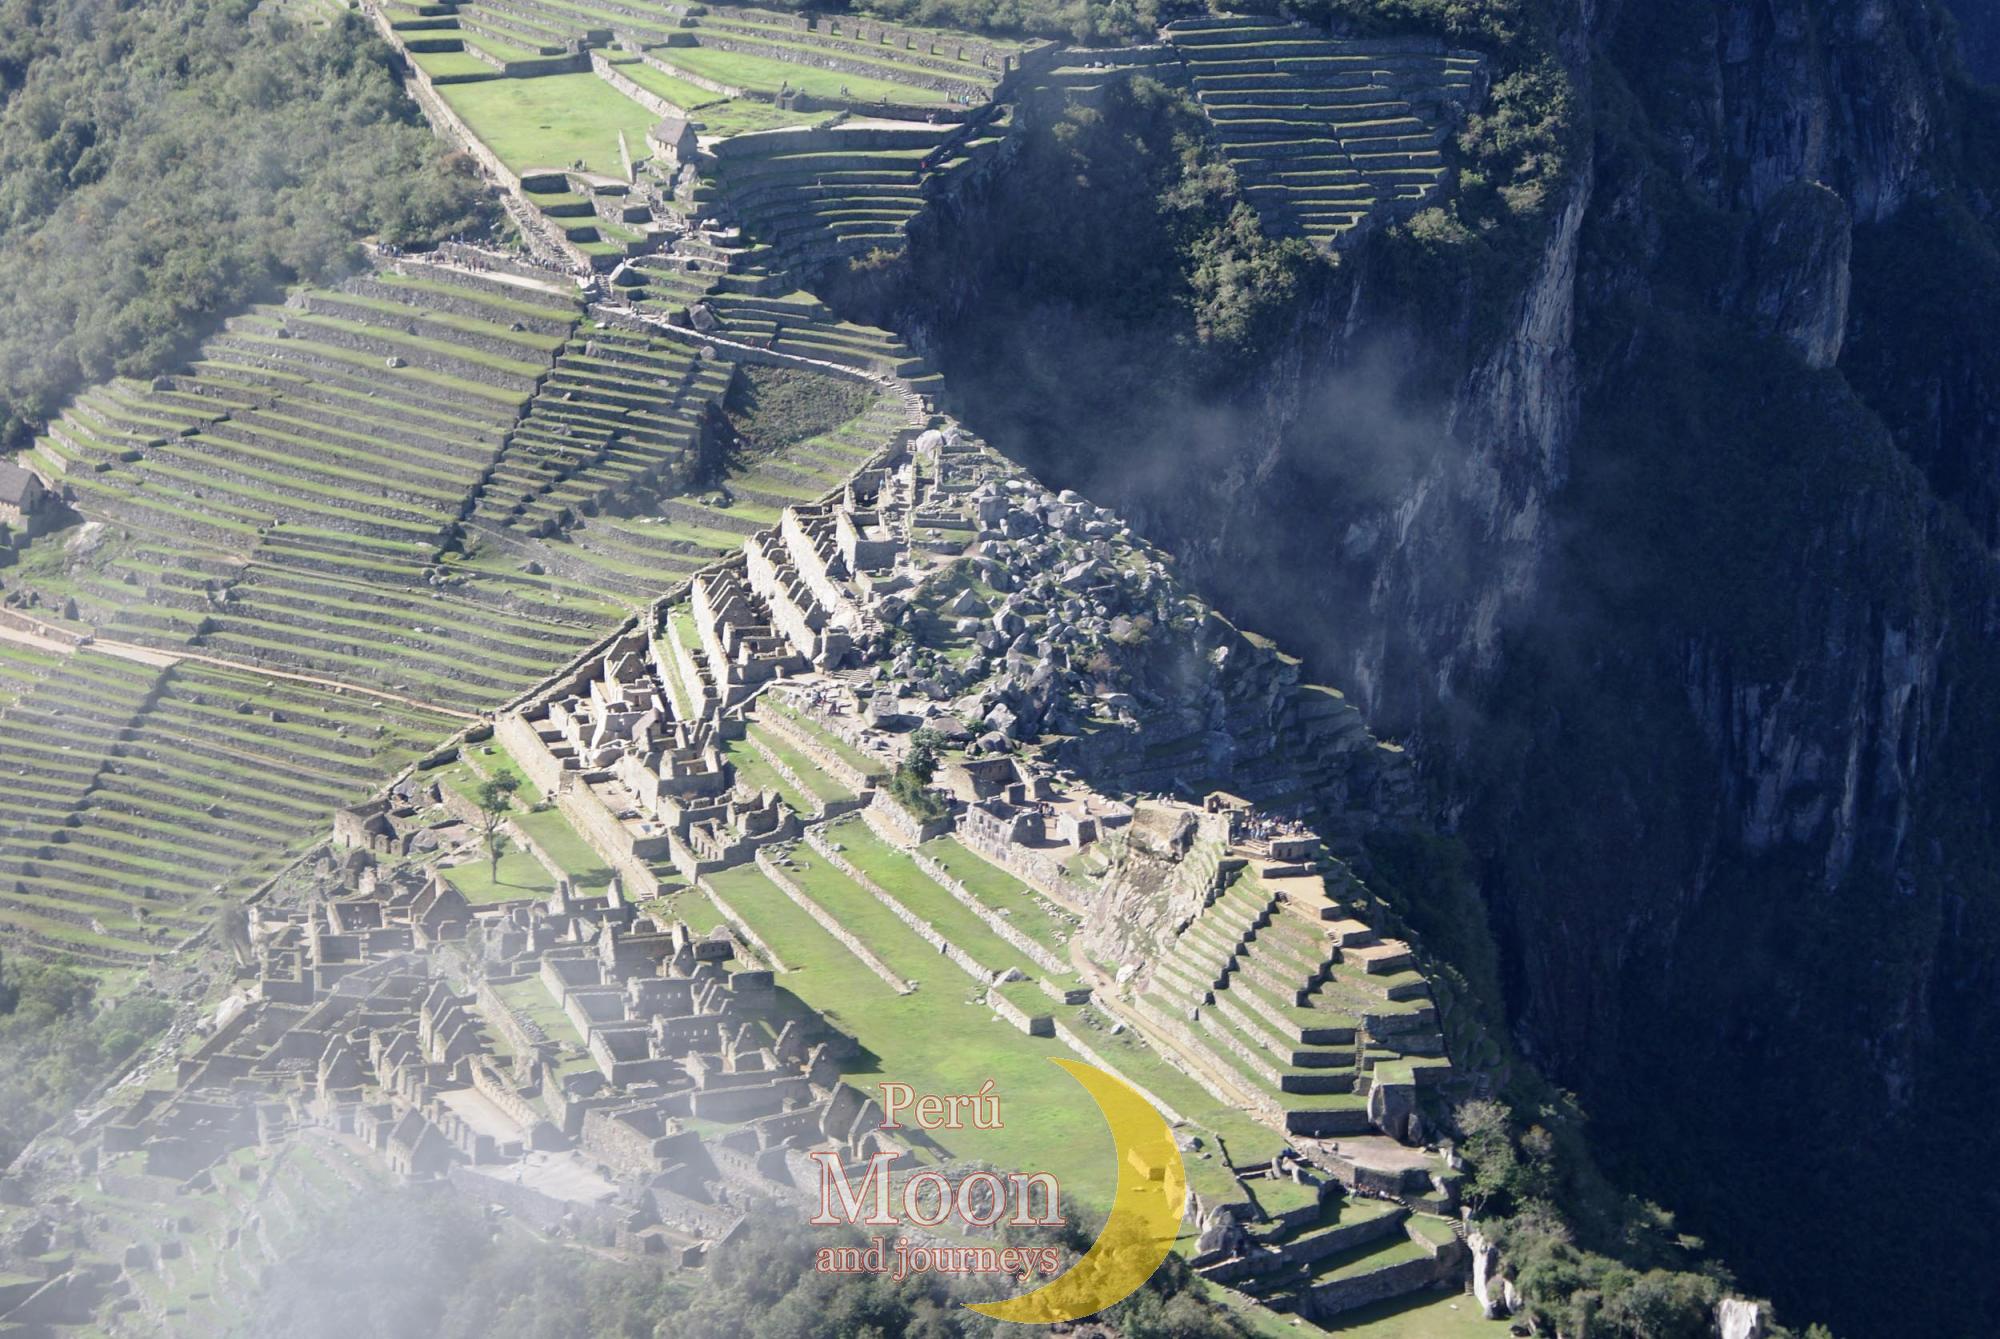 Traditional view of Machu Picchu from the Wayna Picchu 3